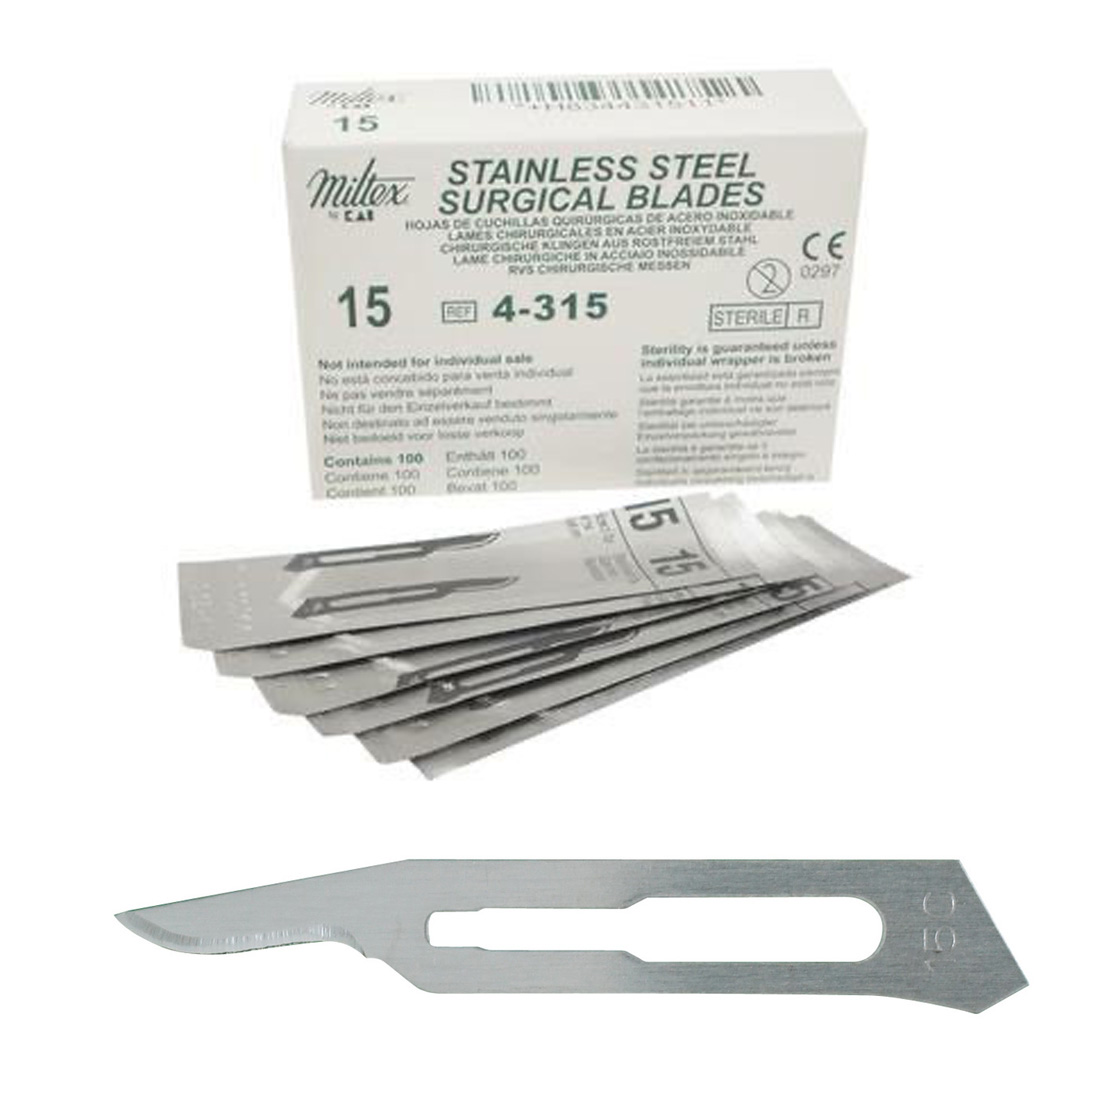 Integra® Miltex® Surgical Blades, #15C, Stainless Steel Sterile- 100/Box